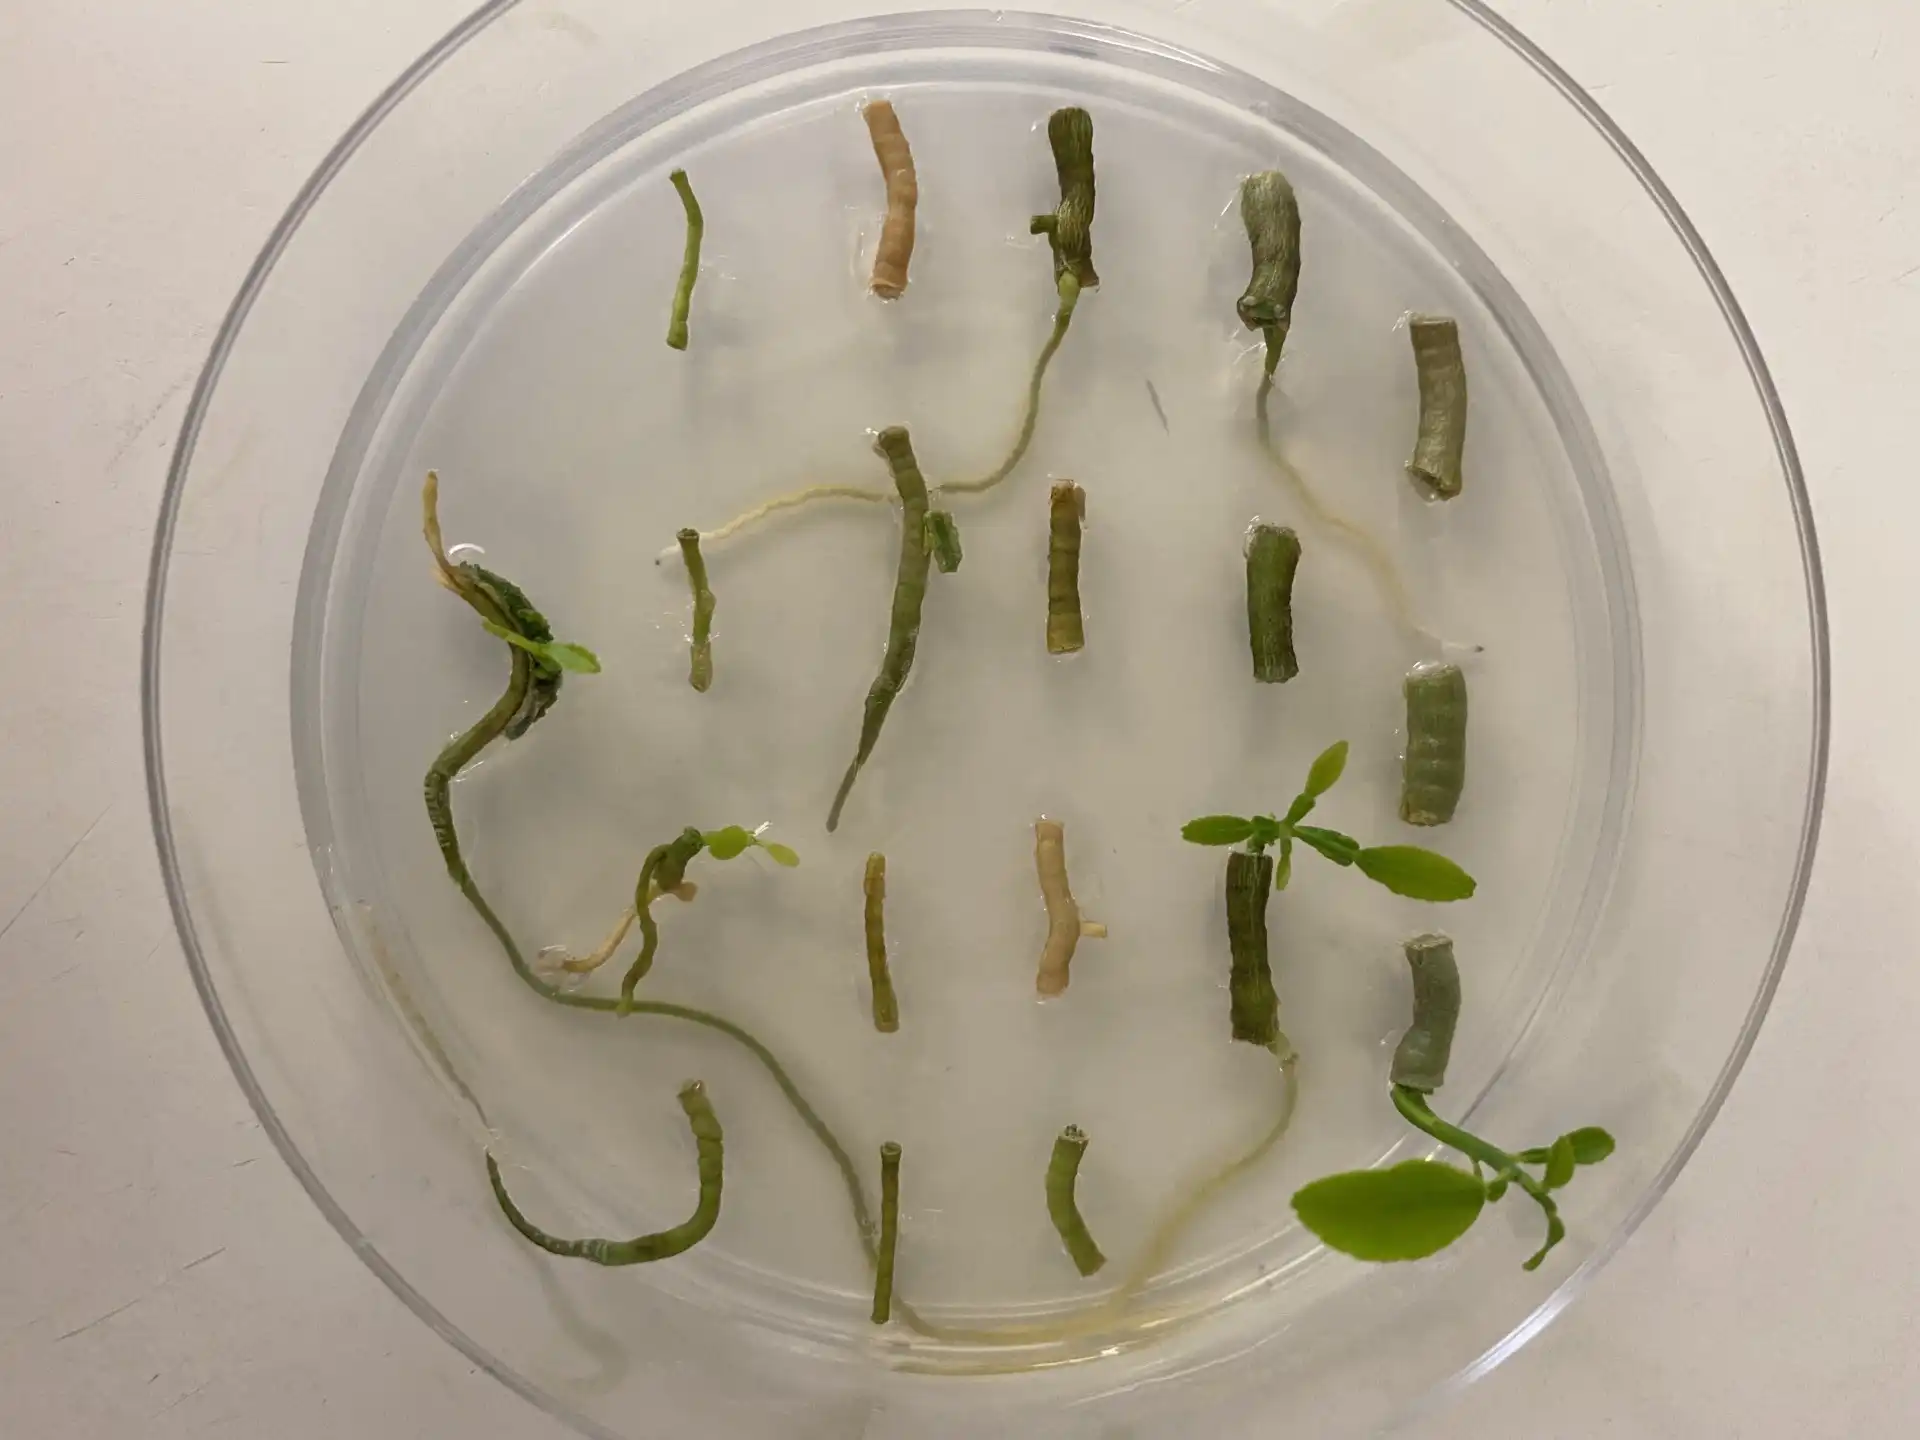 Image: Citrus plant regeneration from hairy roots. Credit: Texas A&M AgriLife photo.